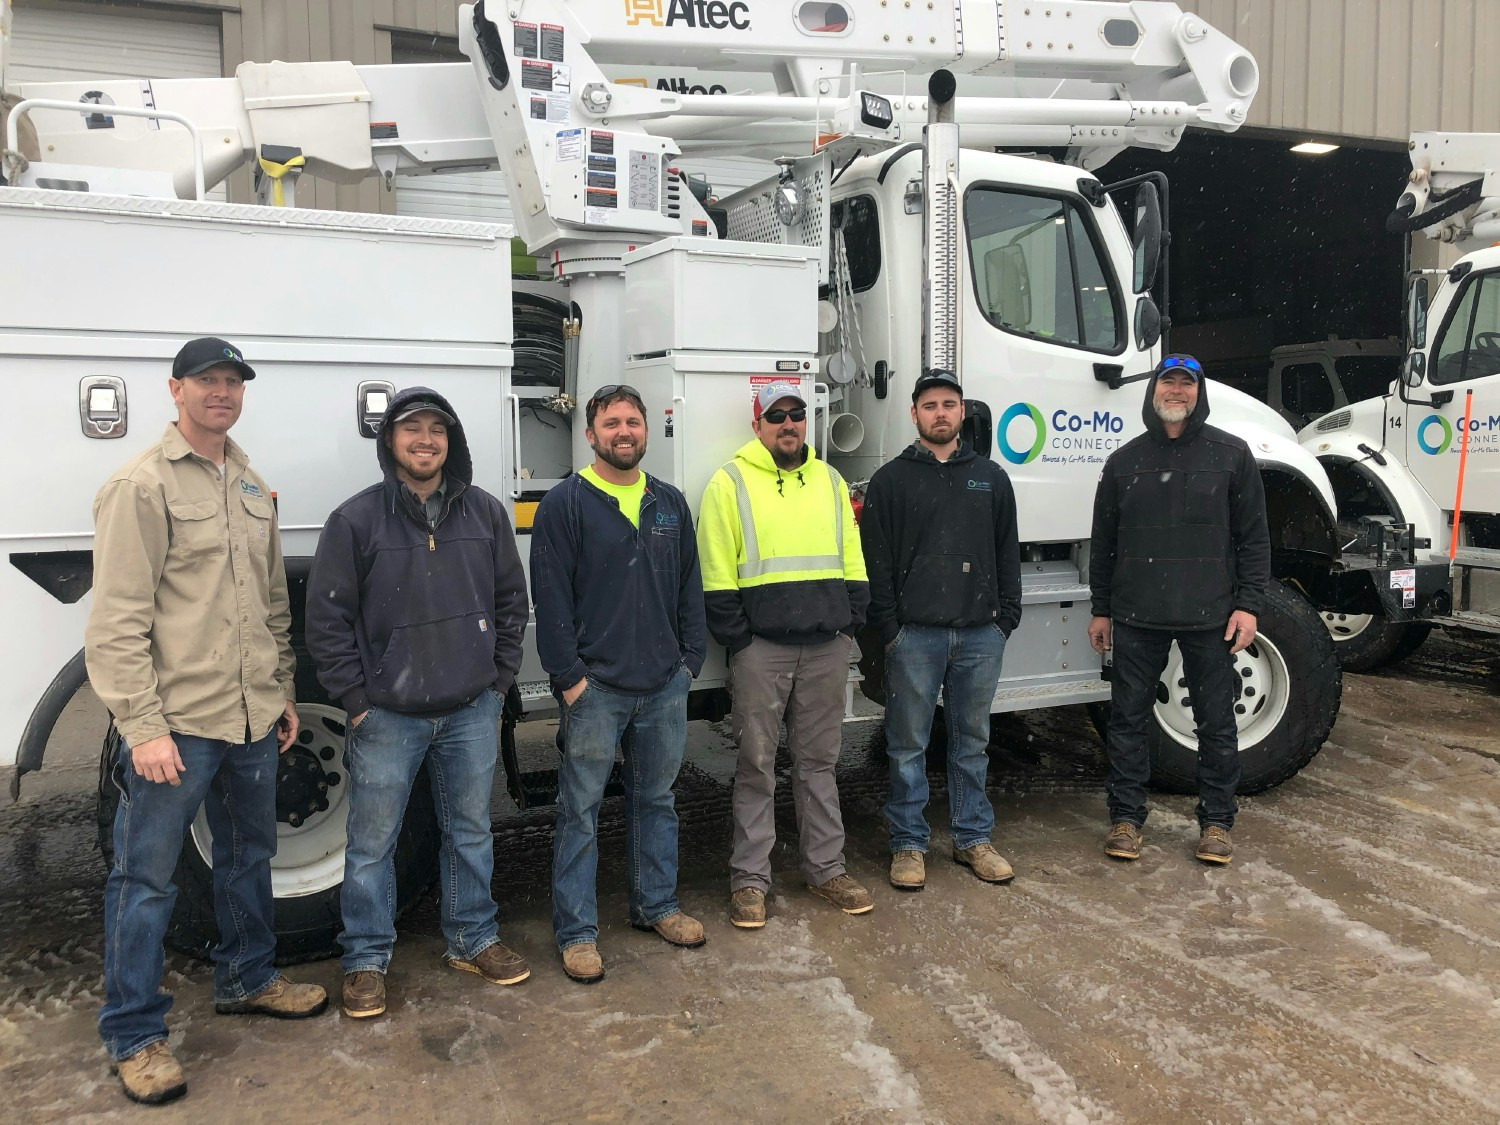 Co-Mo linemen pose for a photo before heading out to assist a neighboring cooperative following a severe weather event.